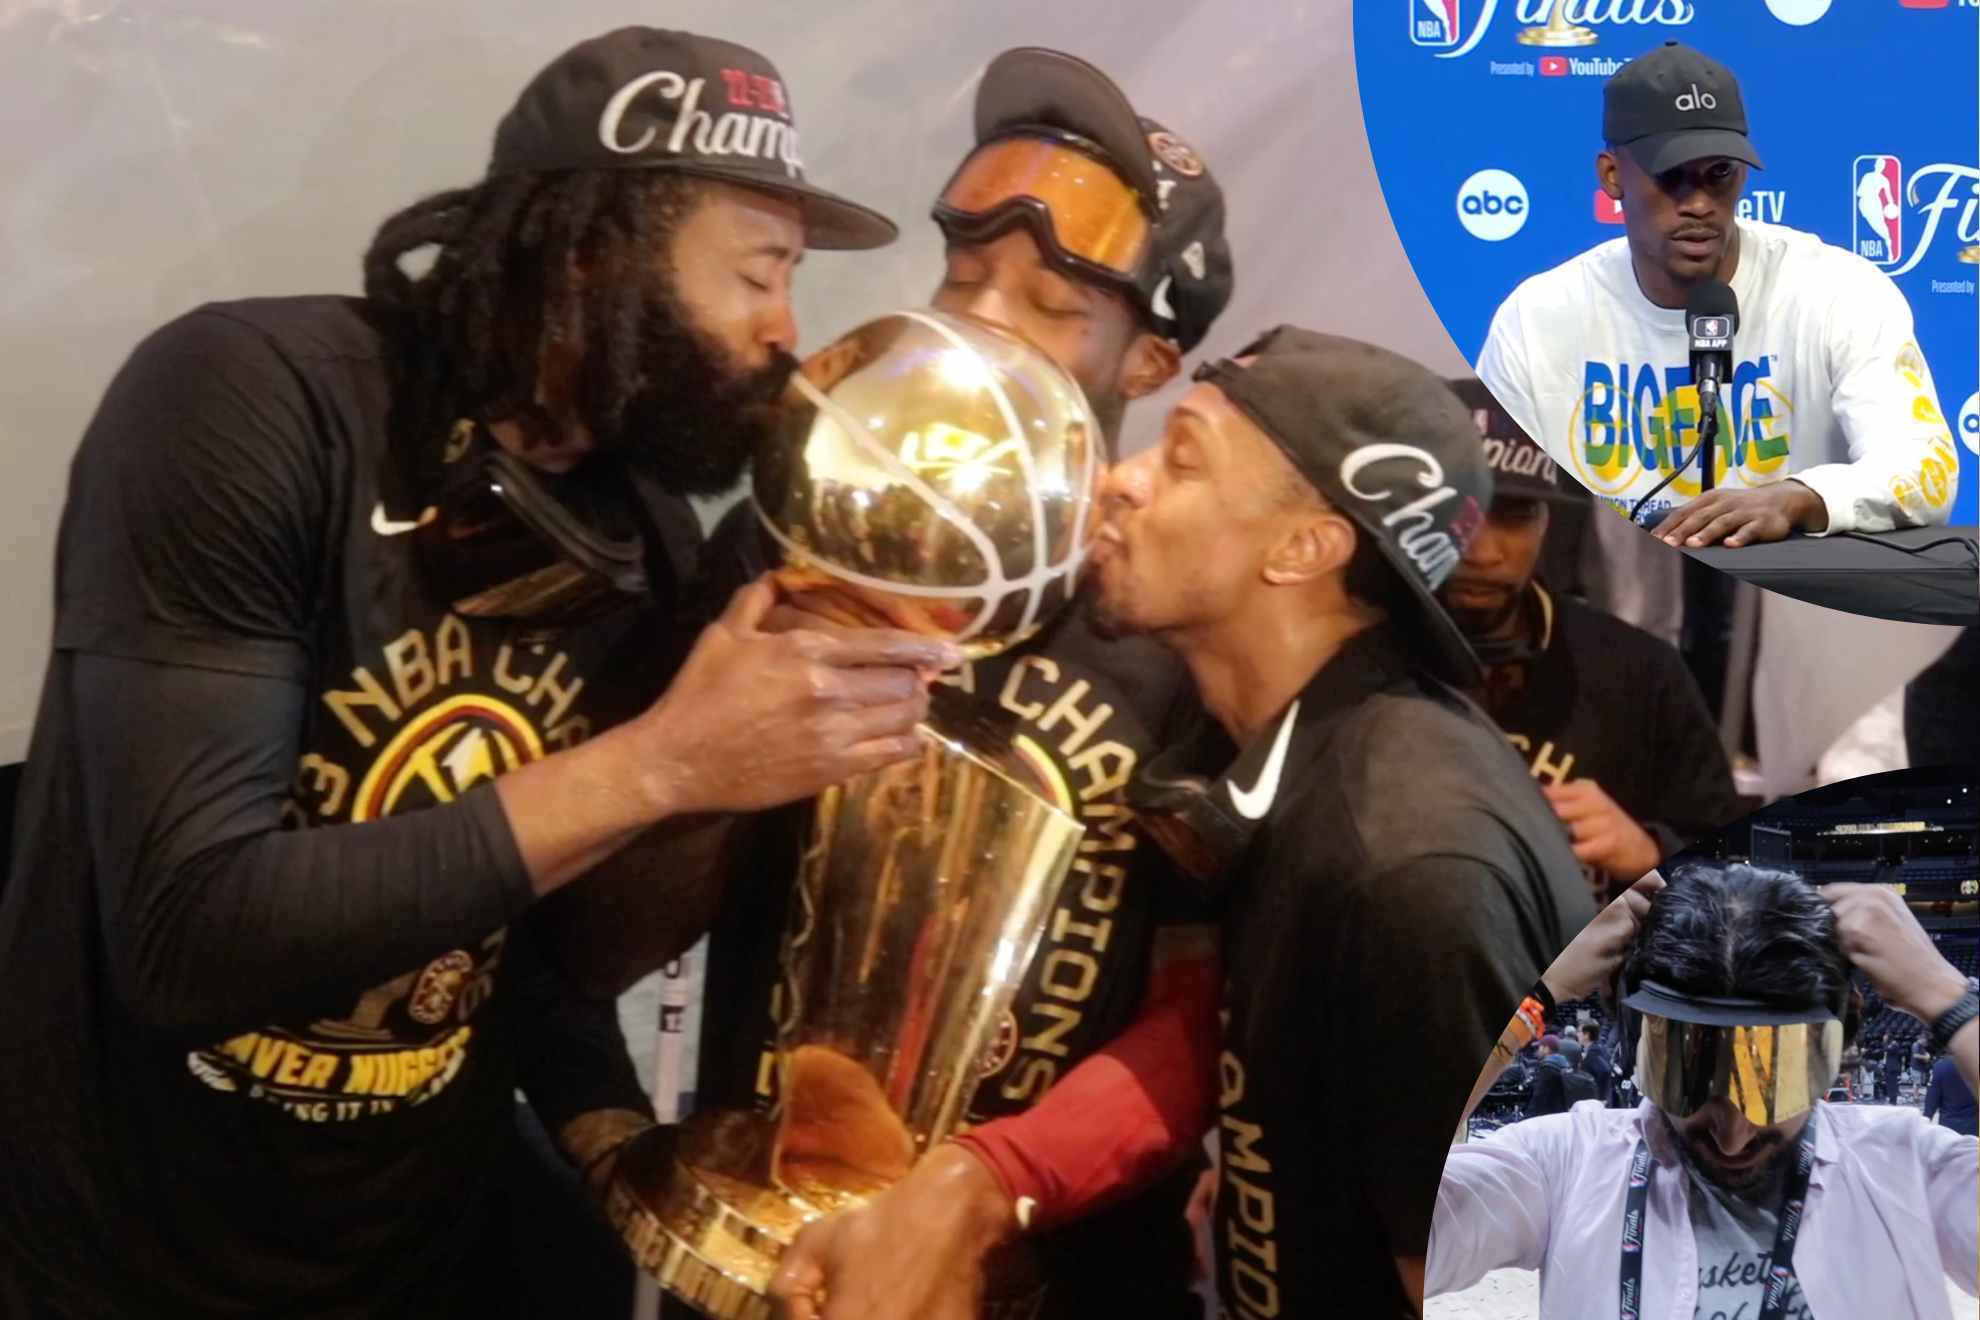 The Denver Nuggets have won the 2023 NBA Championship. Here's how the night played out.